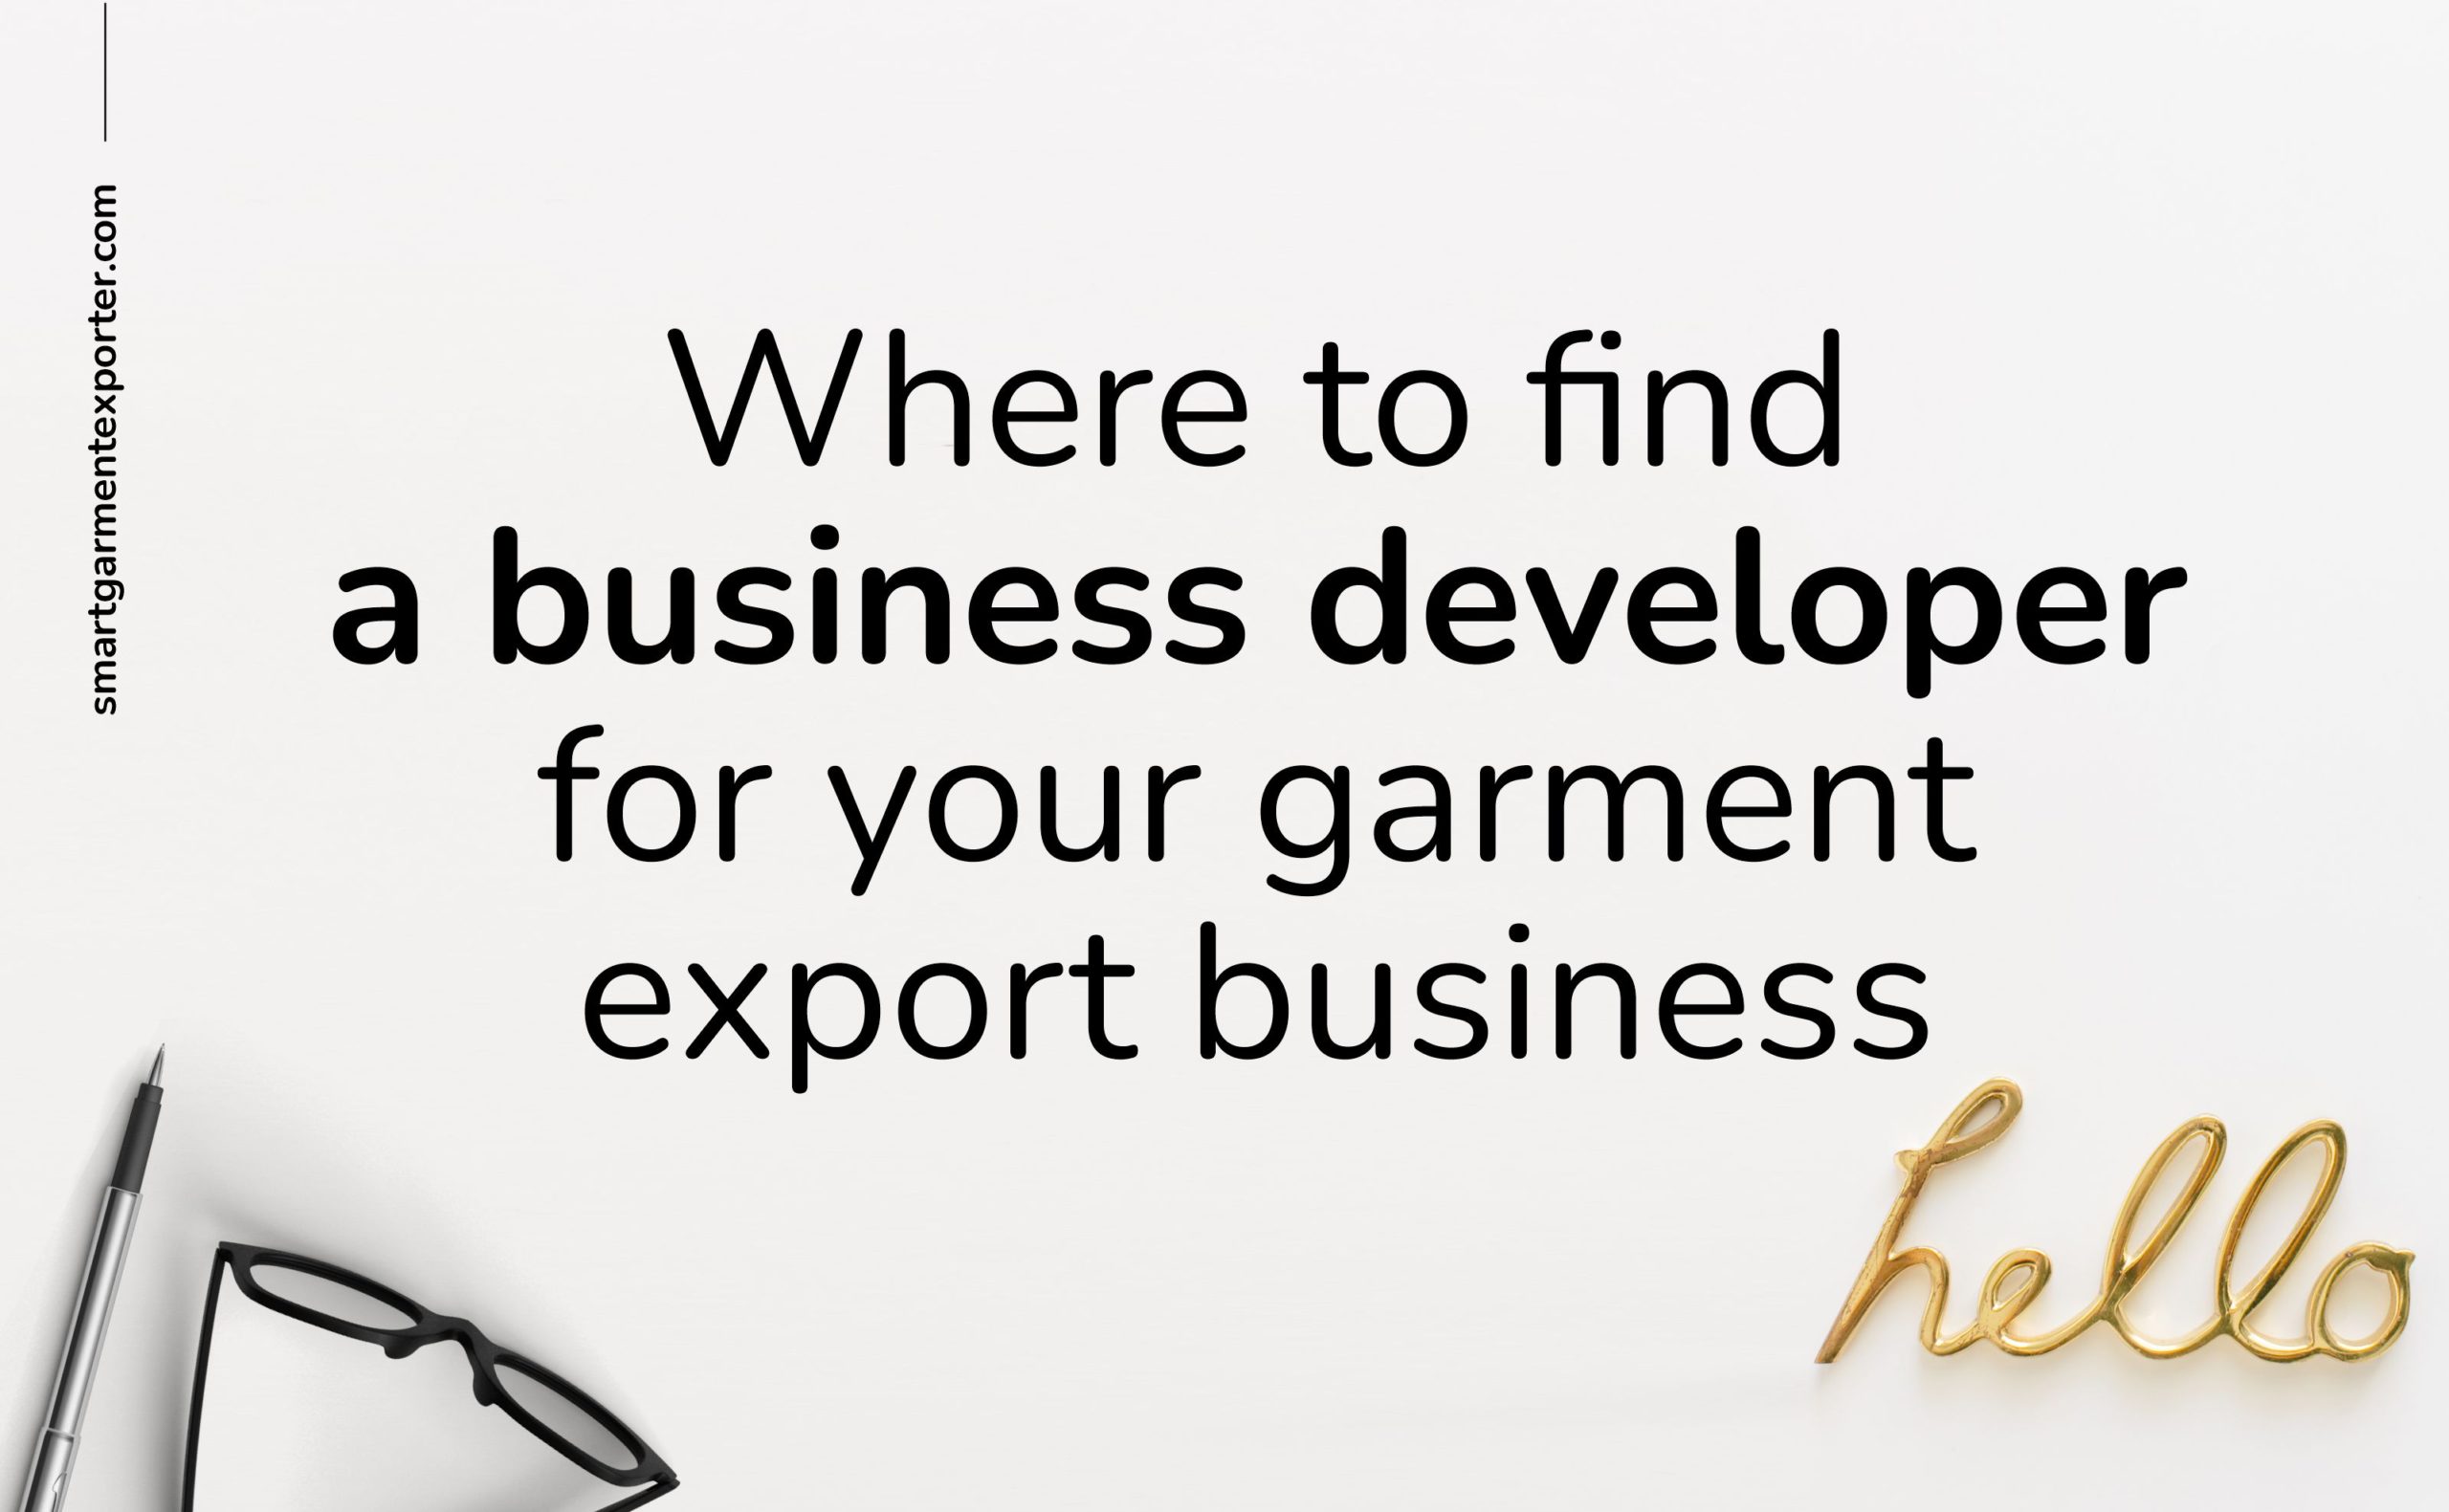 Where can I find an agent/business developer in Europe for my garment export business?